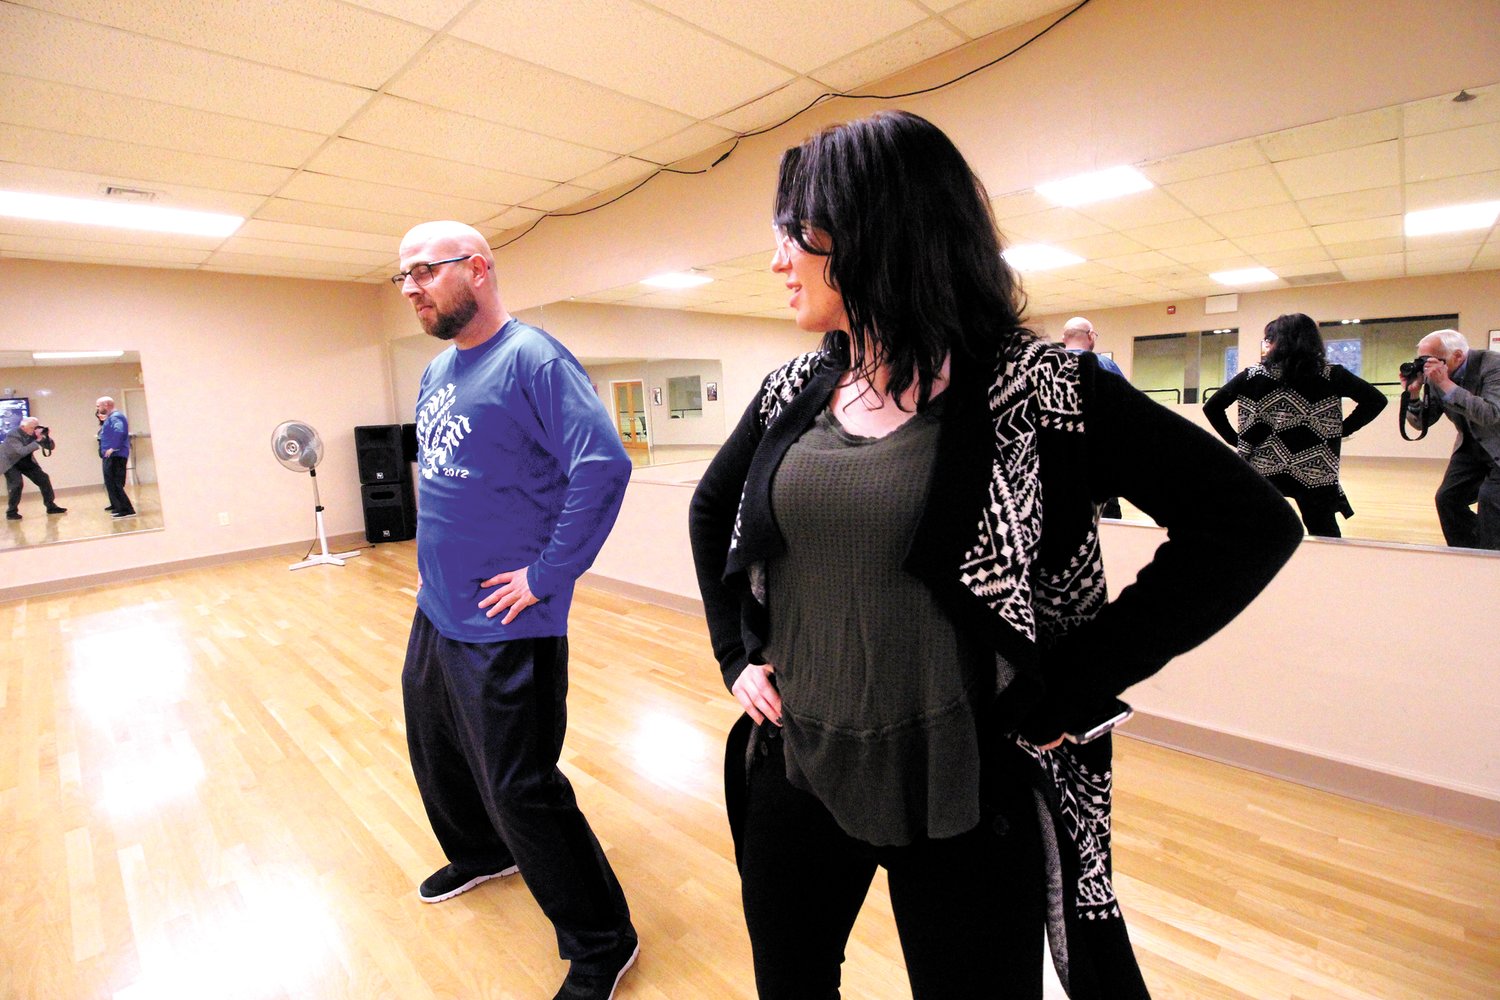 FIRST TIME DANCER: Michael Fratus didn’t hesitate to sign up for Dancing with the Stars of Mentoring when he learned of the work the organization is doing. He said he’s not a dancer, but that’s changing under the tutelage of Mary Lucas. “I’m pumped,” he said.